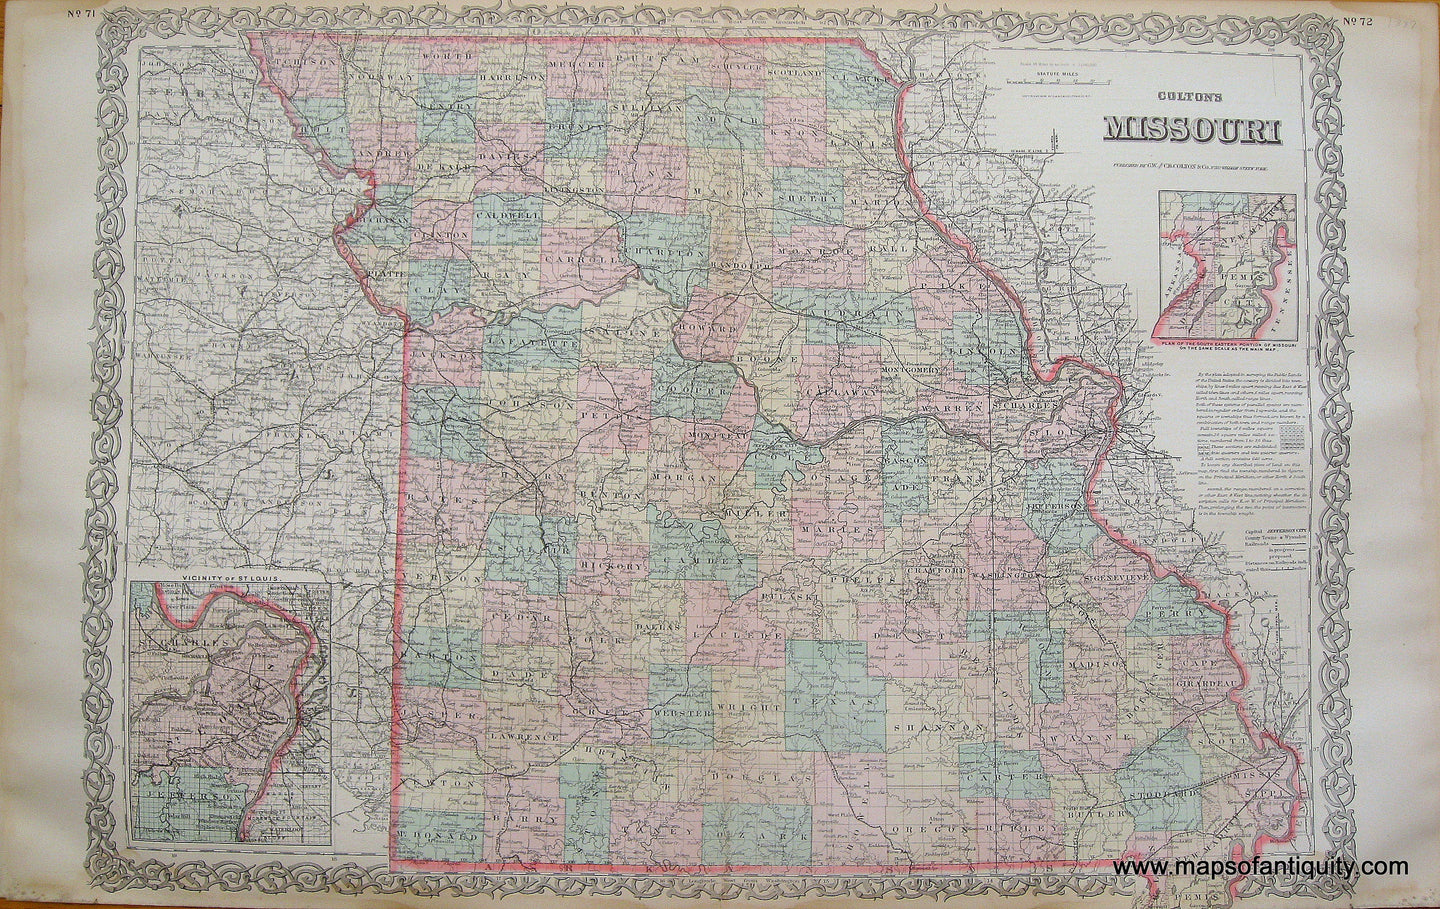 Antique-Hand-Colored-Map-Coltons-Missouri-1887-Colton-Maps-Of-Antiquity